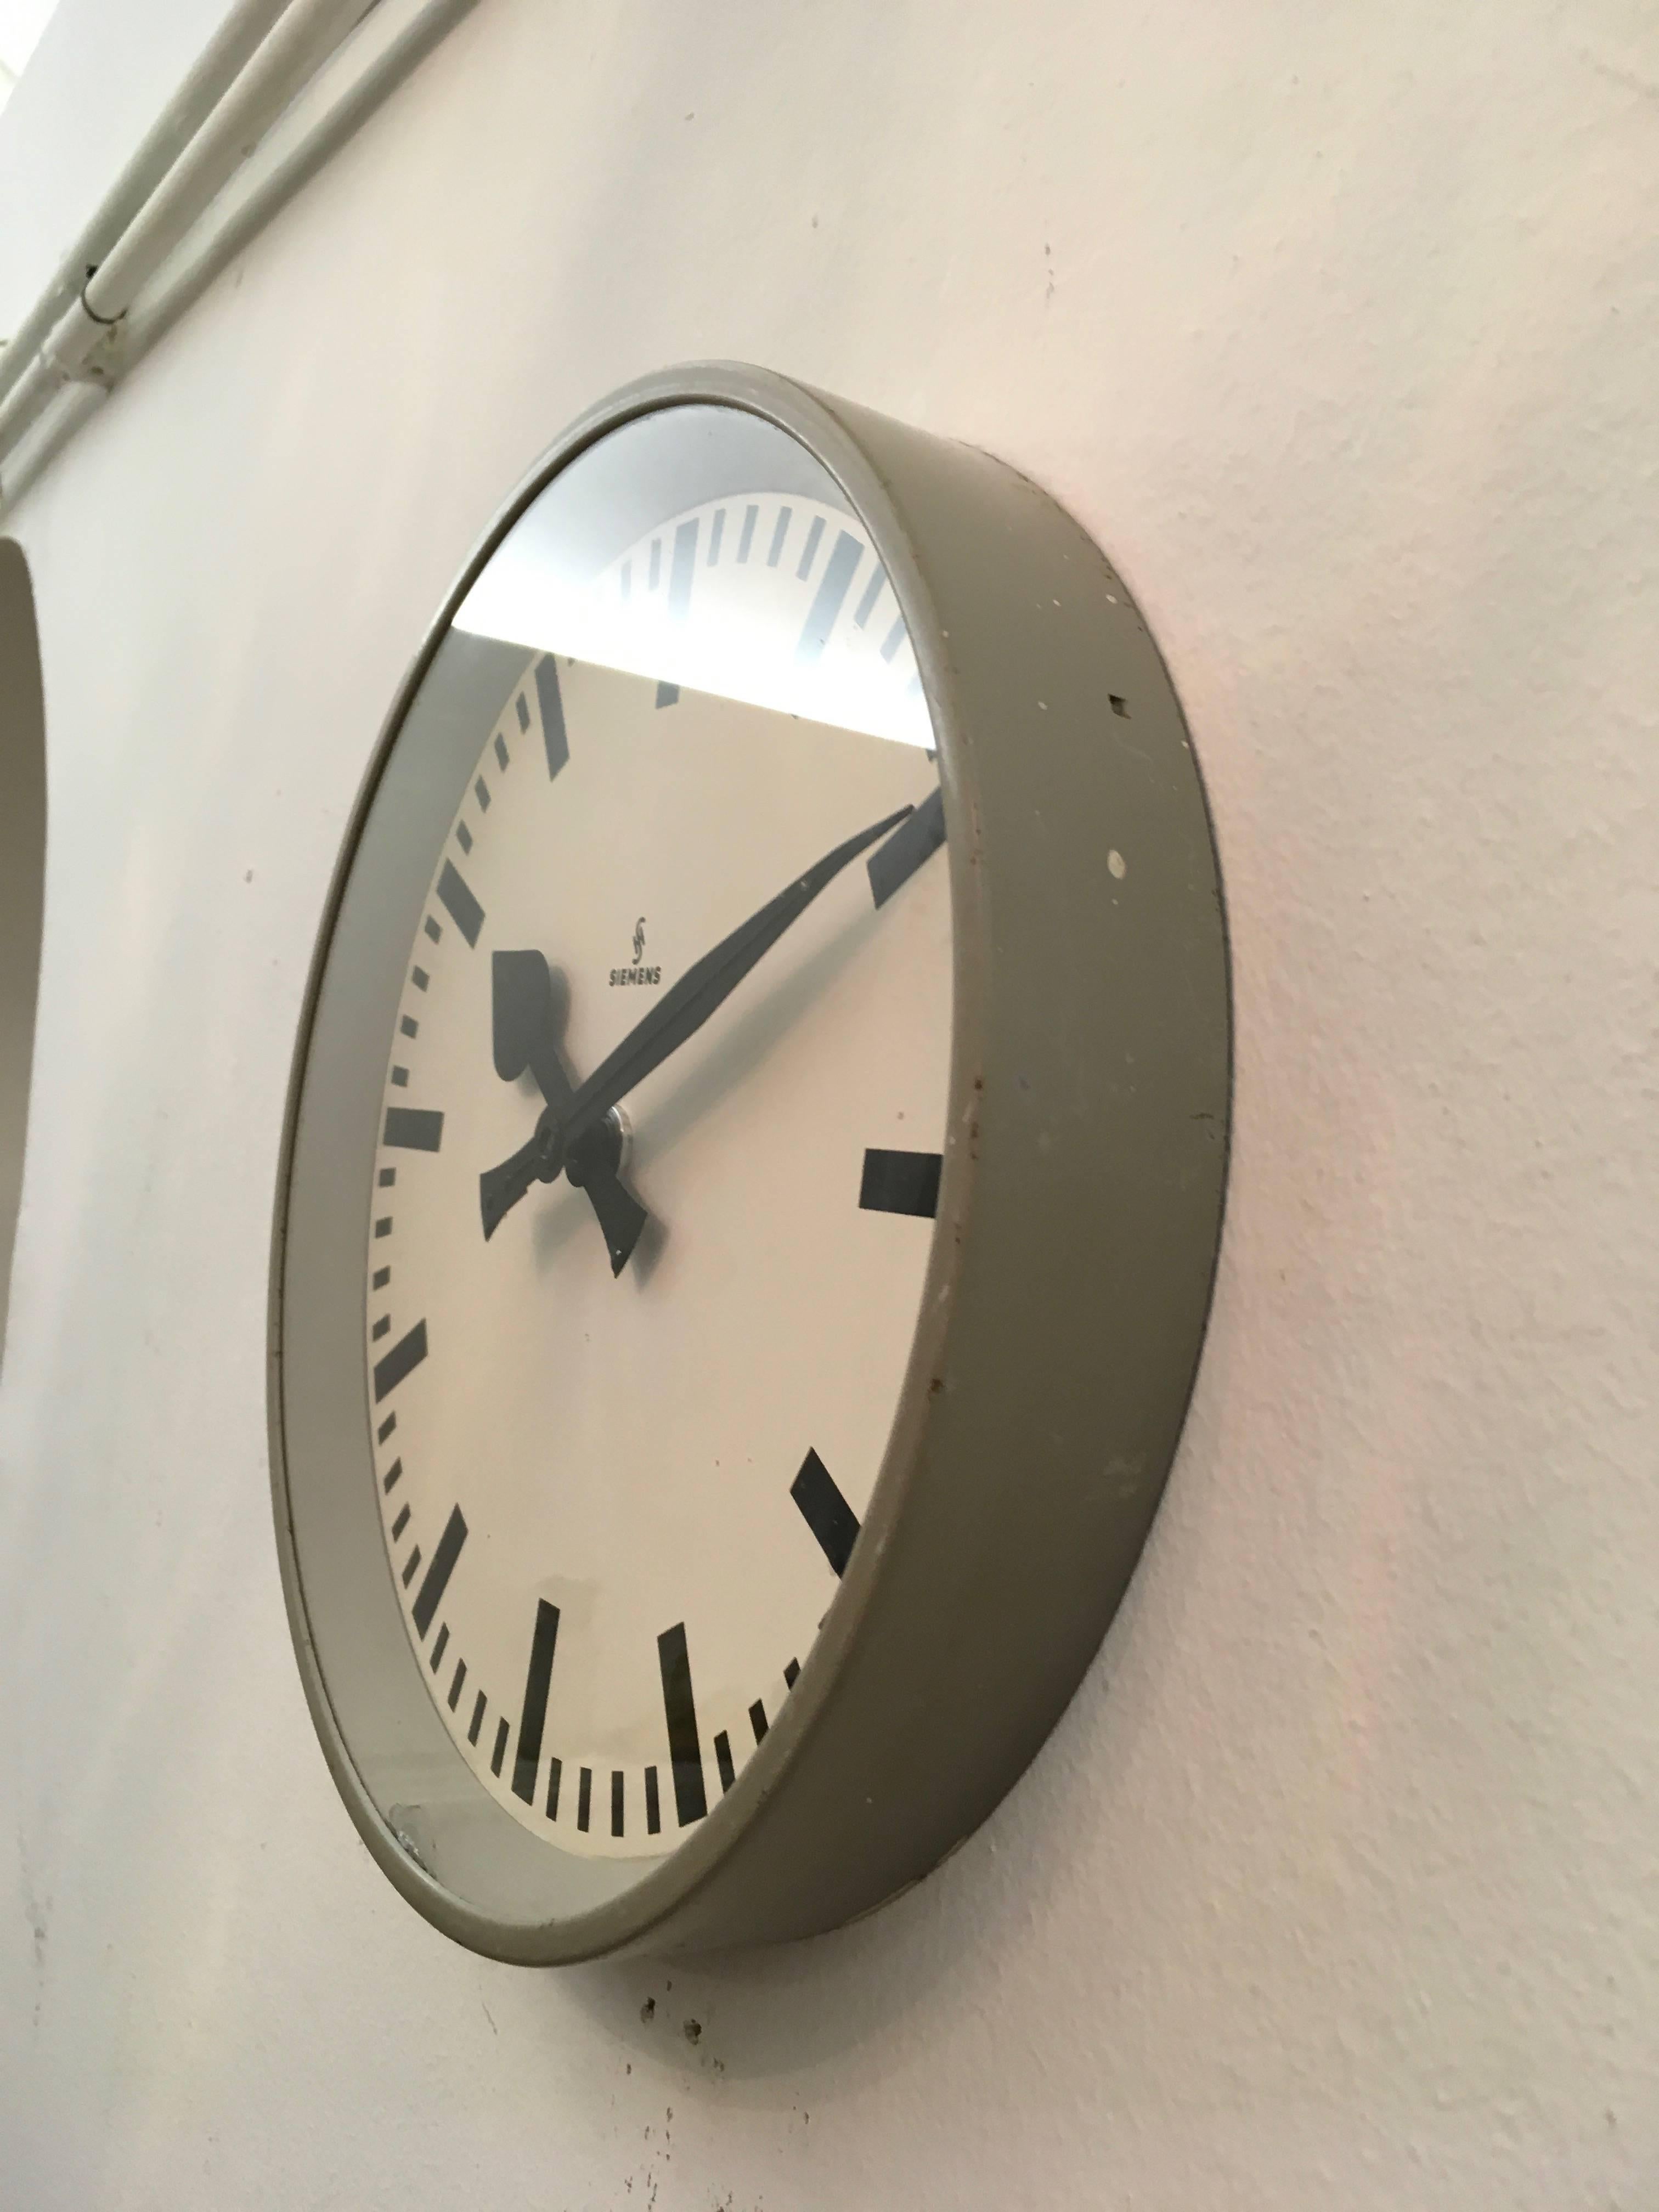 Steel painted with glass front made in Austria in the 1950s.
Formerly a slave clock, it is now fitted with a modern quartz movement with a battery.